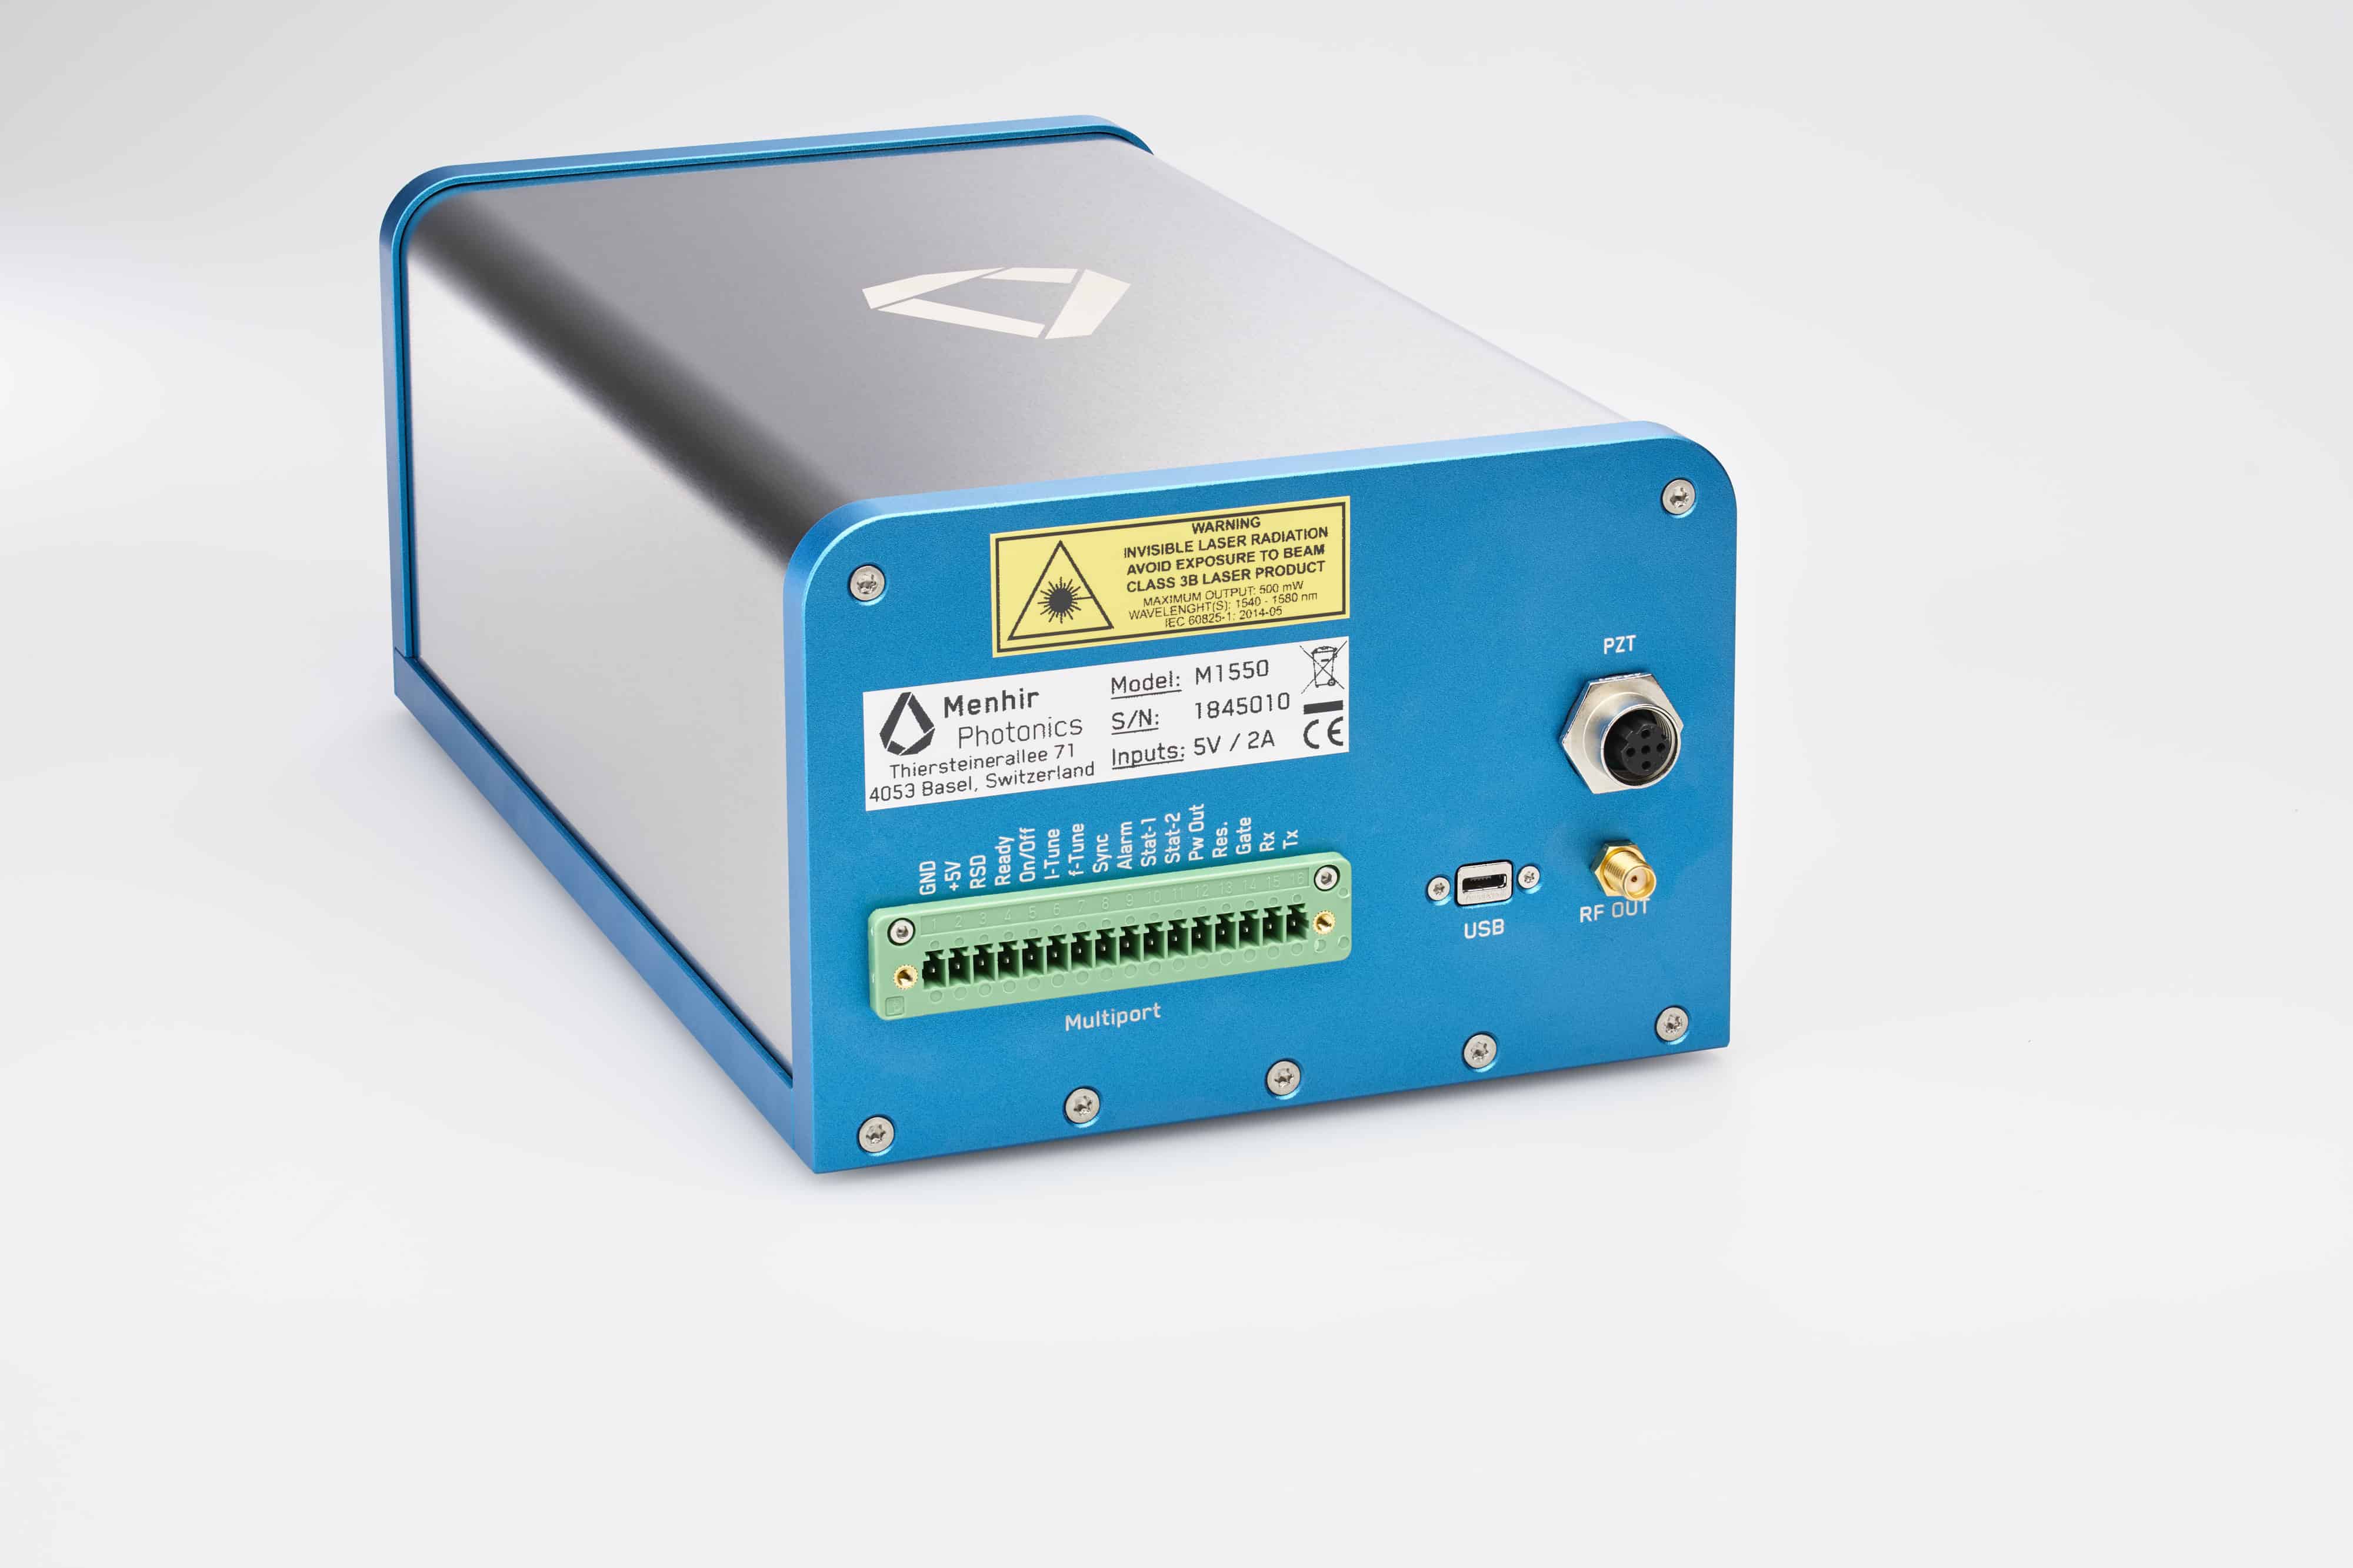 MENHIR-1550-SERIES femtosecond lasers with ultra-low noise